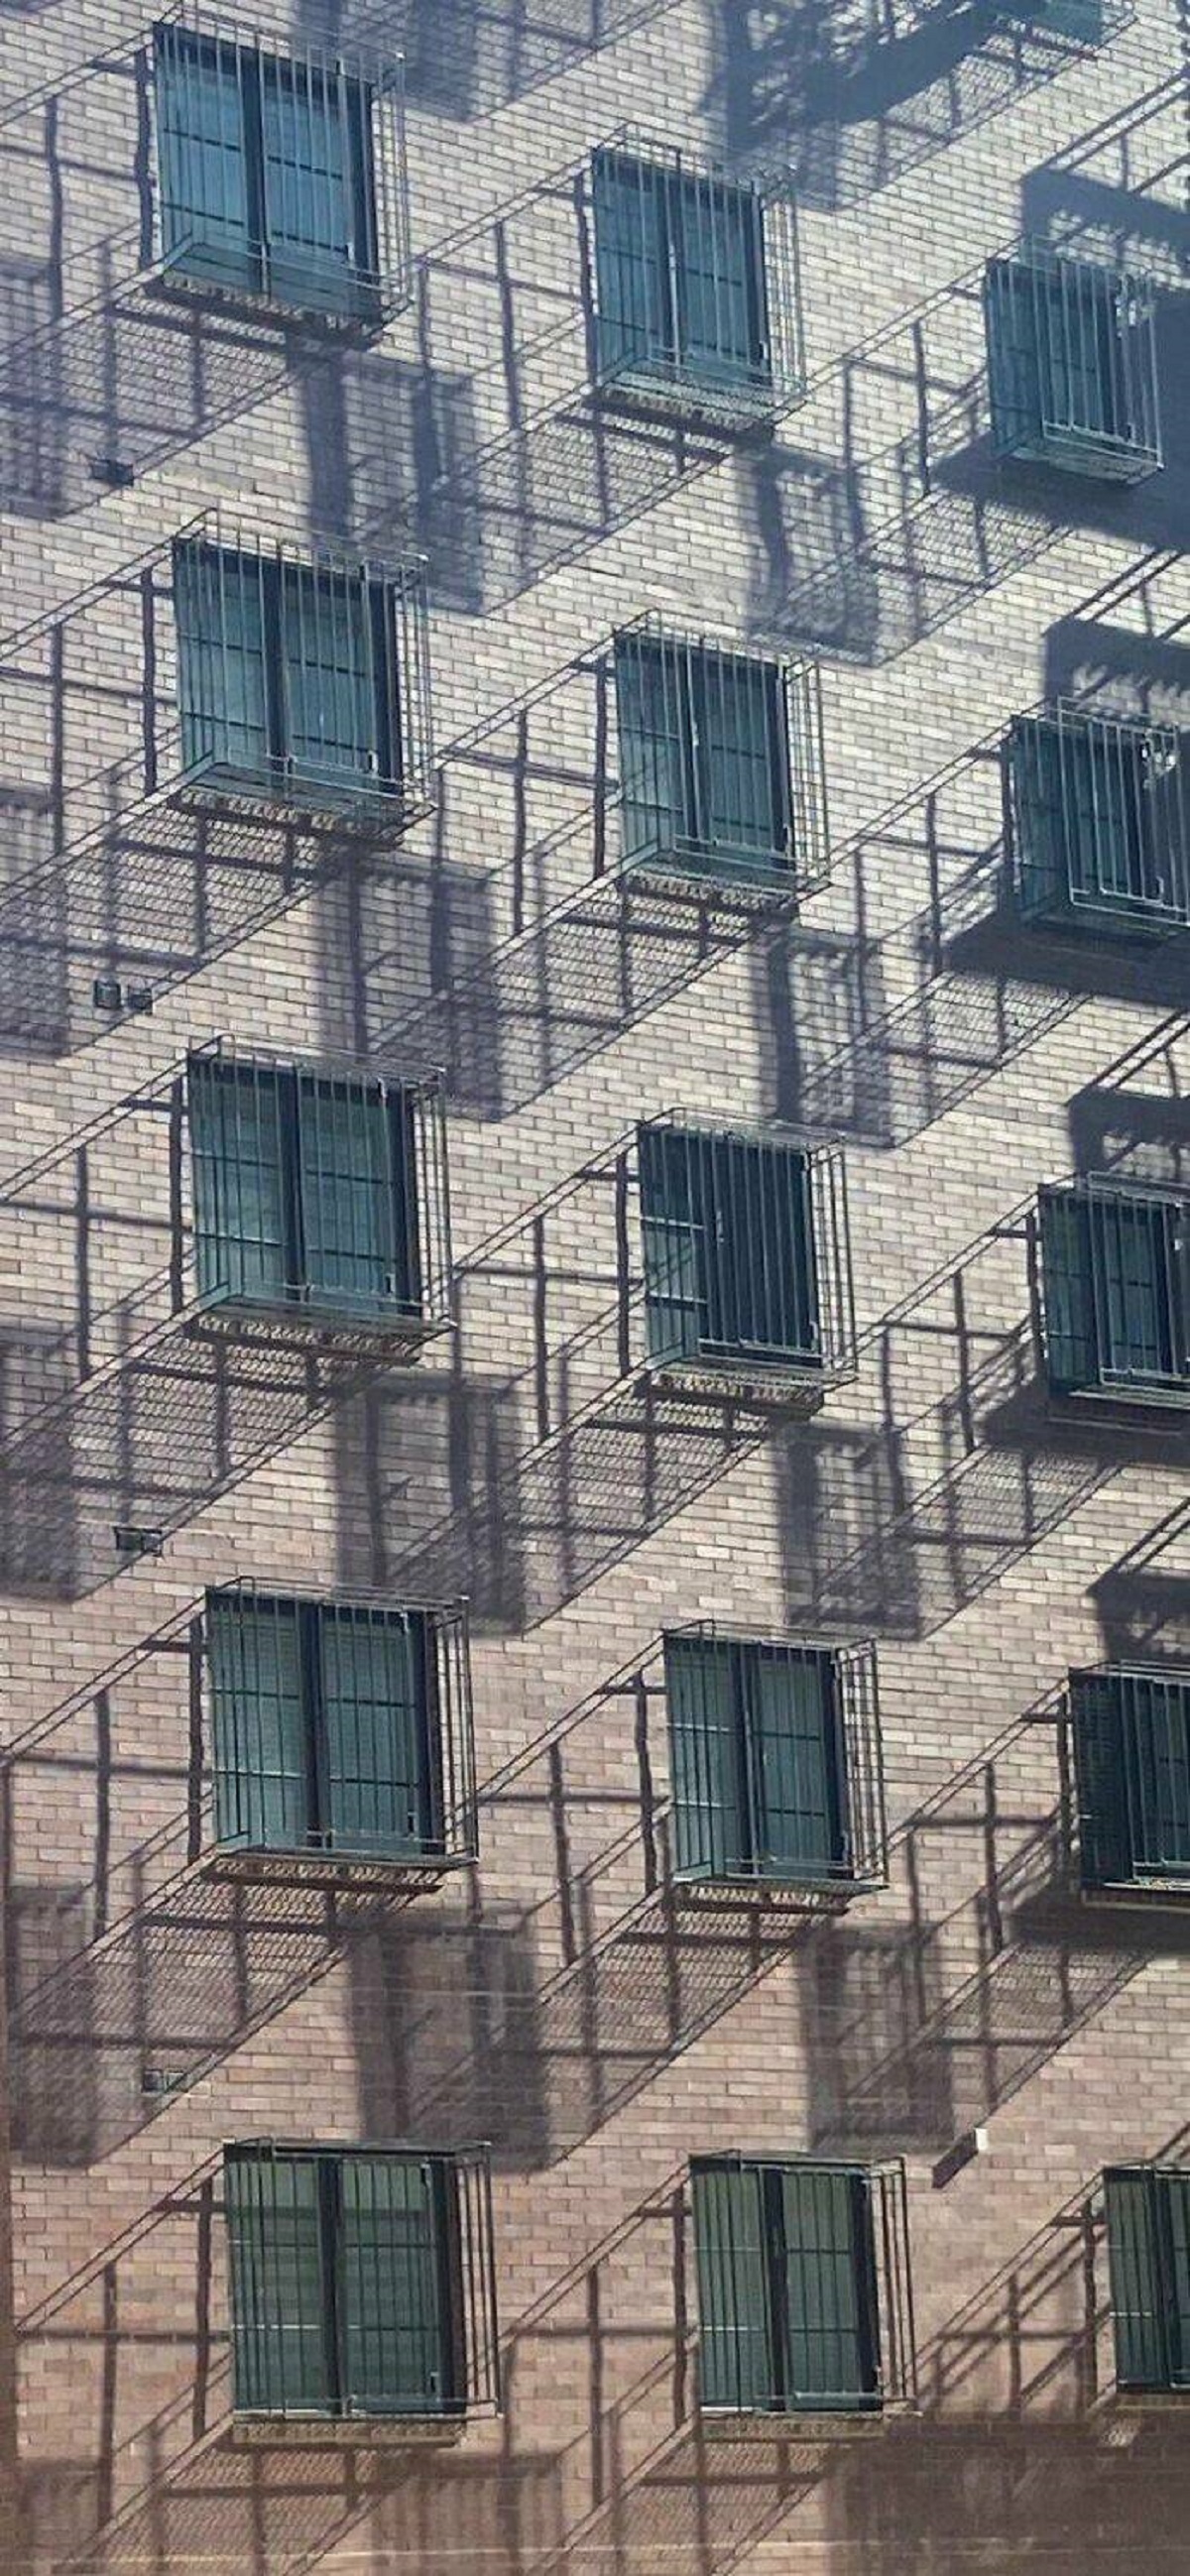 "The Shadows From These Window Cages Create A 3D Effect"